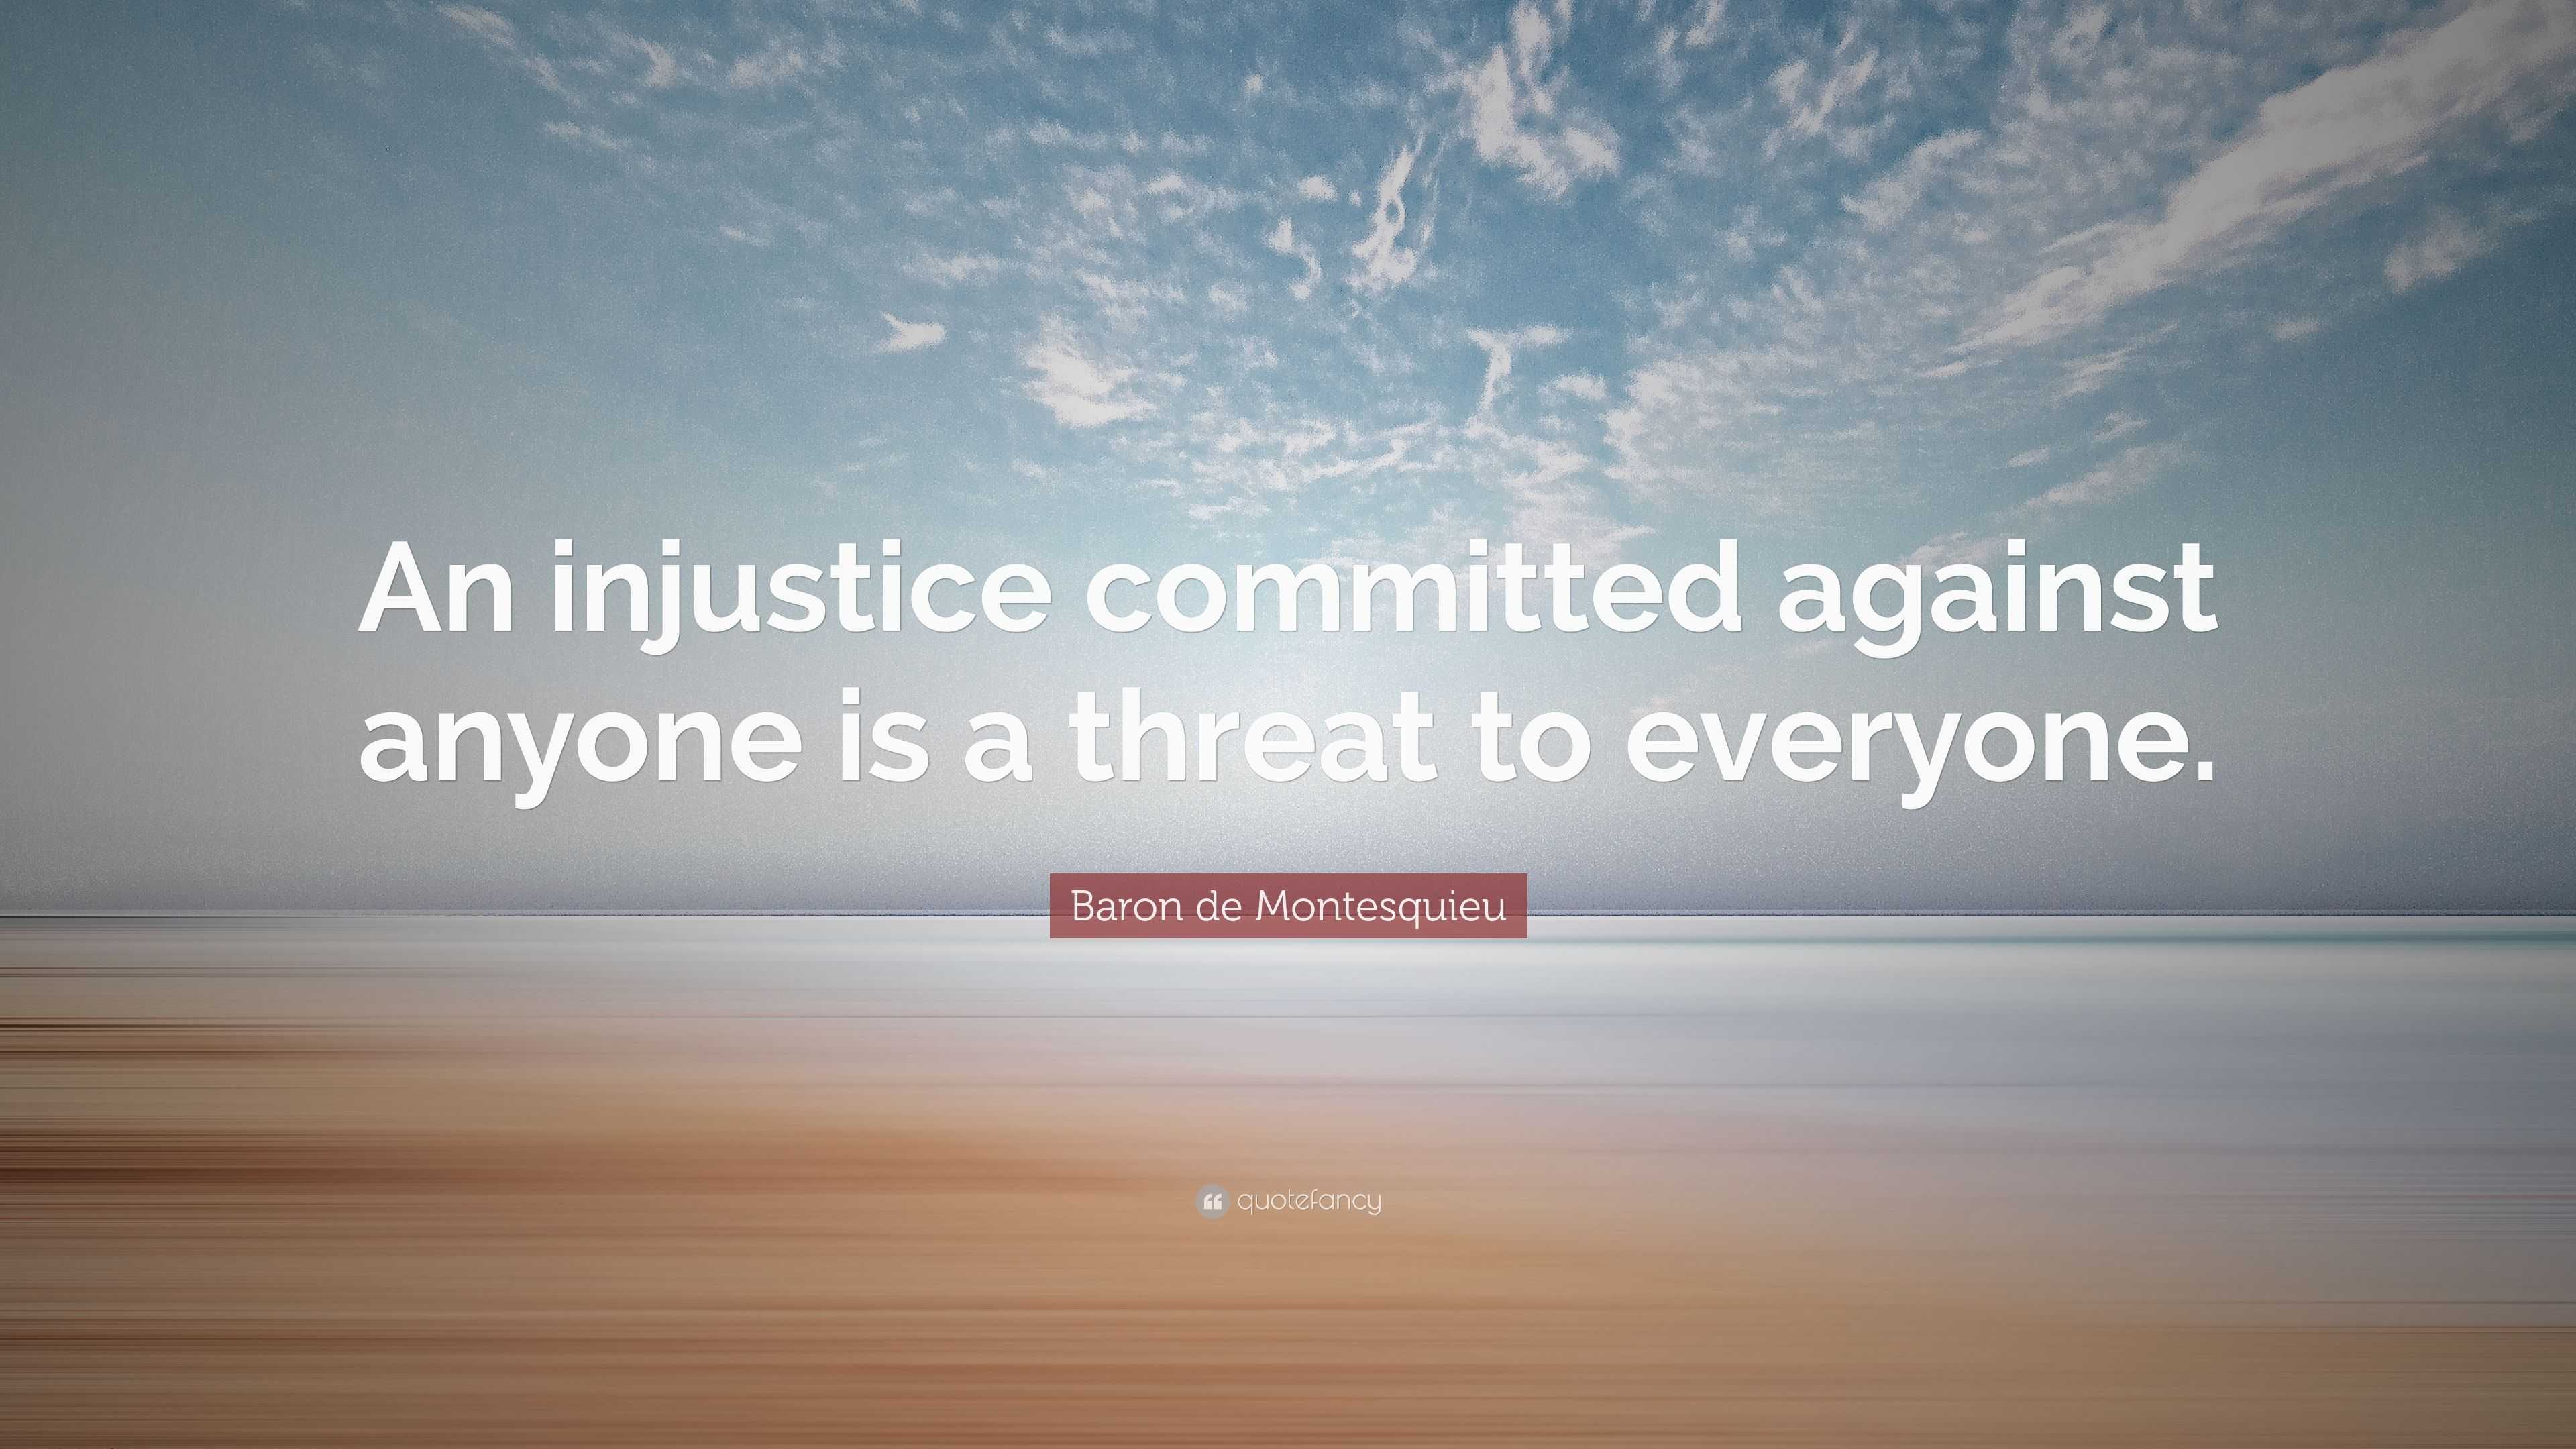 Baron de Montesquieu Quote: “An injustice committed against anyone is a ...